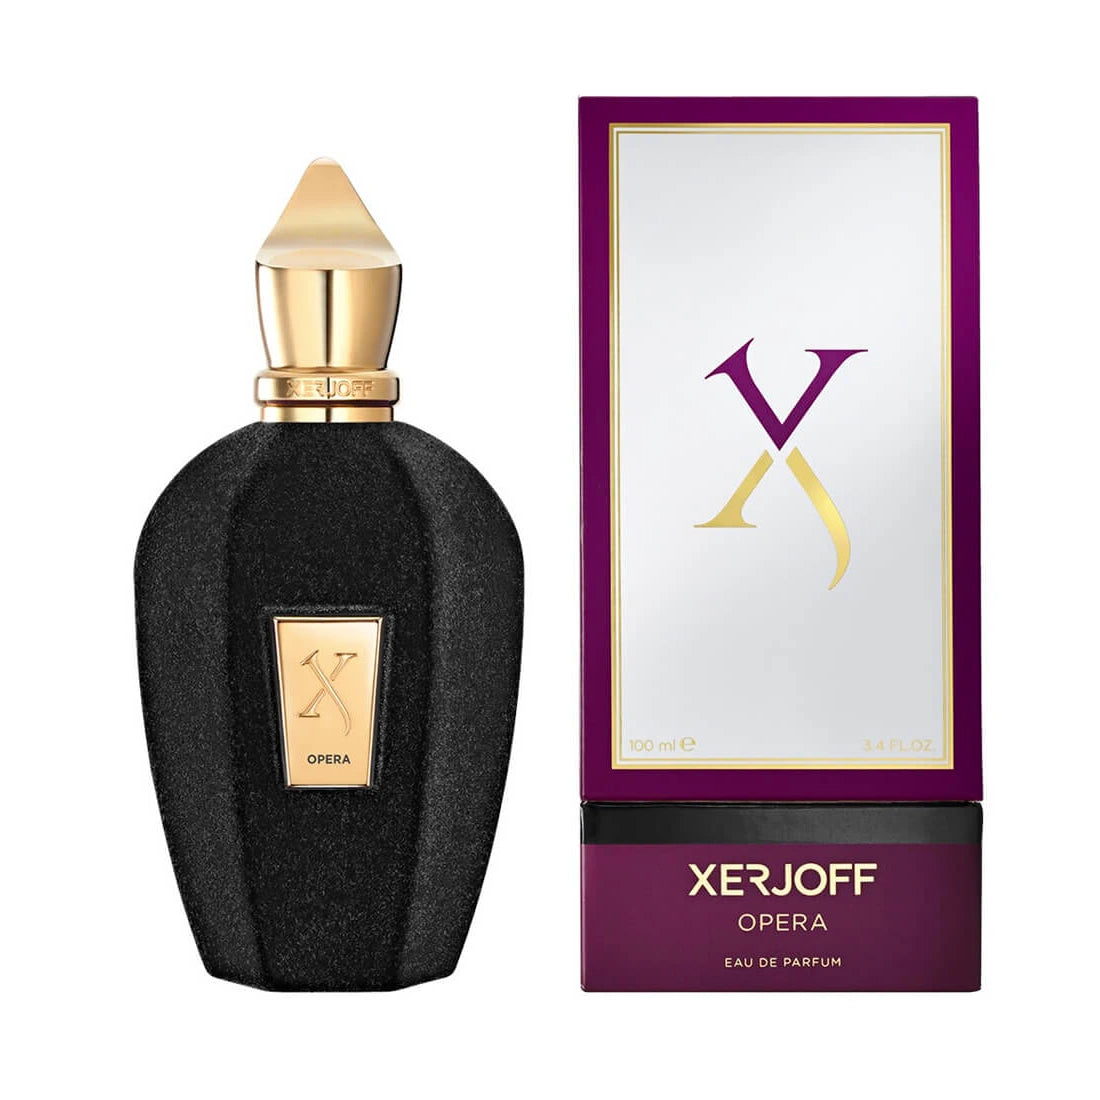 <p>Experience the extravagant beauty of Xerjoff Opera. Captivating Turkish Rose, warming leather and amber, and sensual ylang-ylang and nutmeg create a rich and mysterious fragrance. Part of the exclusive V collection, this scent celebrates pure luxury with notes of vanilla, patchouli, Haitian vetiver, and cedarwood.</p>